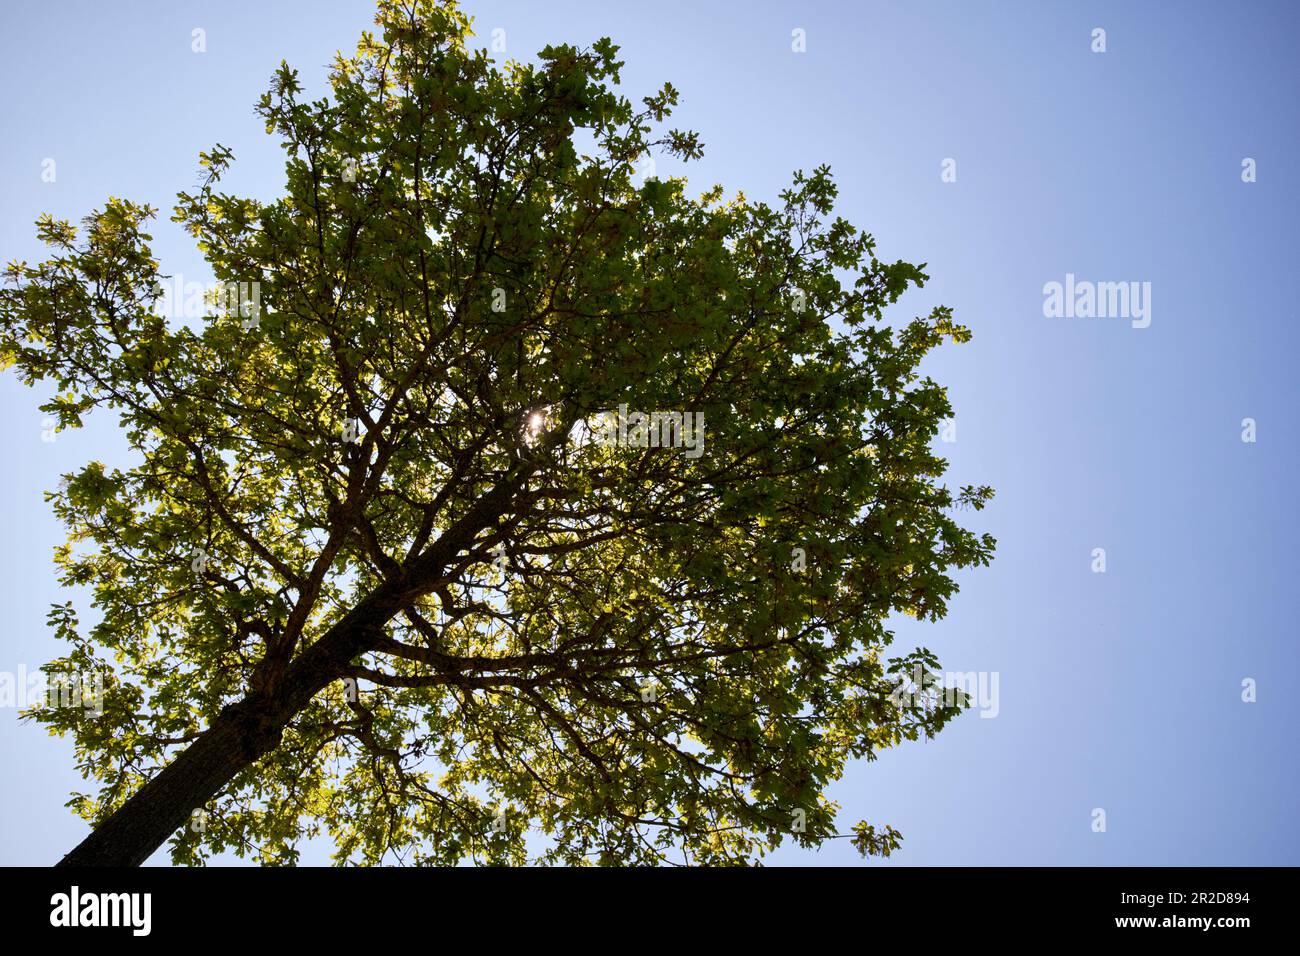 sitting in the shade of a small tree on a hot summers day in the uk looking up Stock Photo